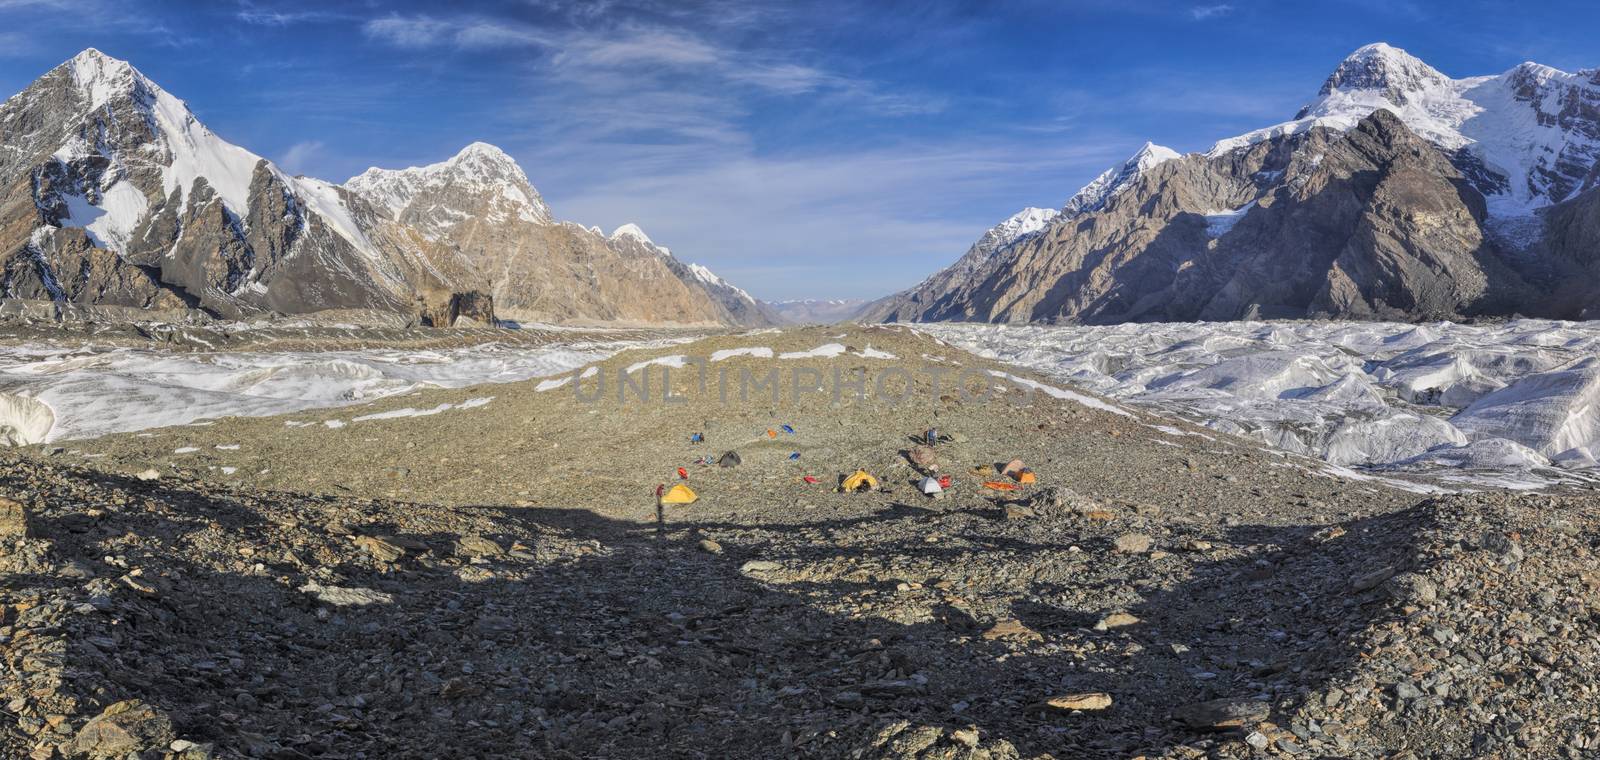 Scenic panorama of base camp on Engilchek glacier in picturesque Tian Shan mountain range in Kyrgyzstan